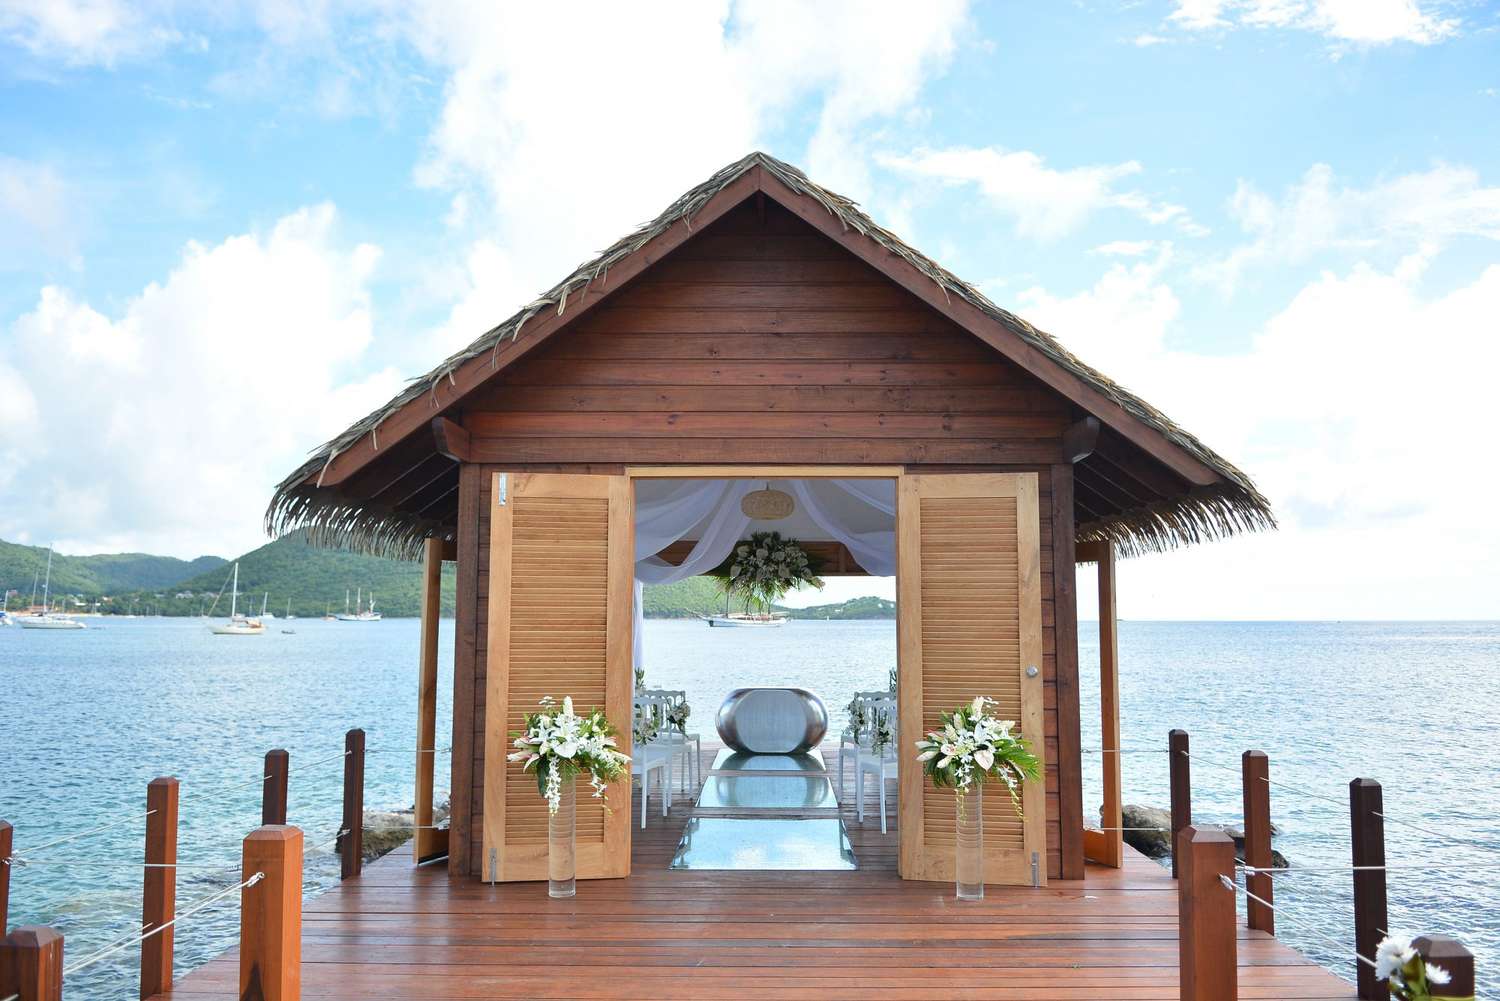 Sandals Resorts' first overwater wedding chapel in the Caribbean, exterior